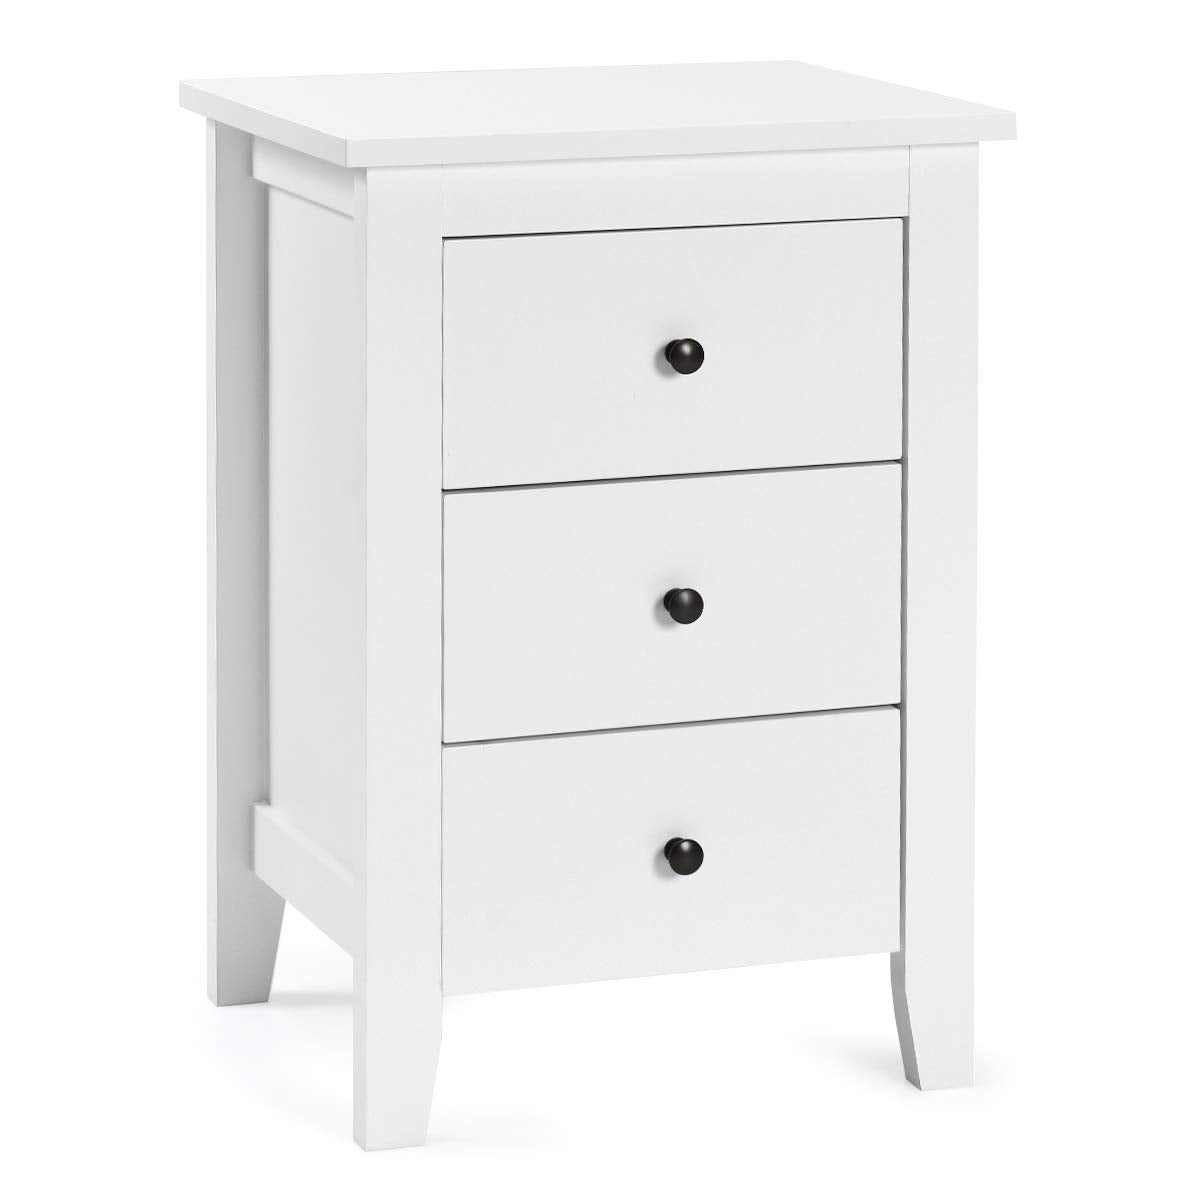 Giantex Nightstand W/ 3 Drawers Large Storage Space, Solid Structure and Stable Frame (1)